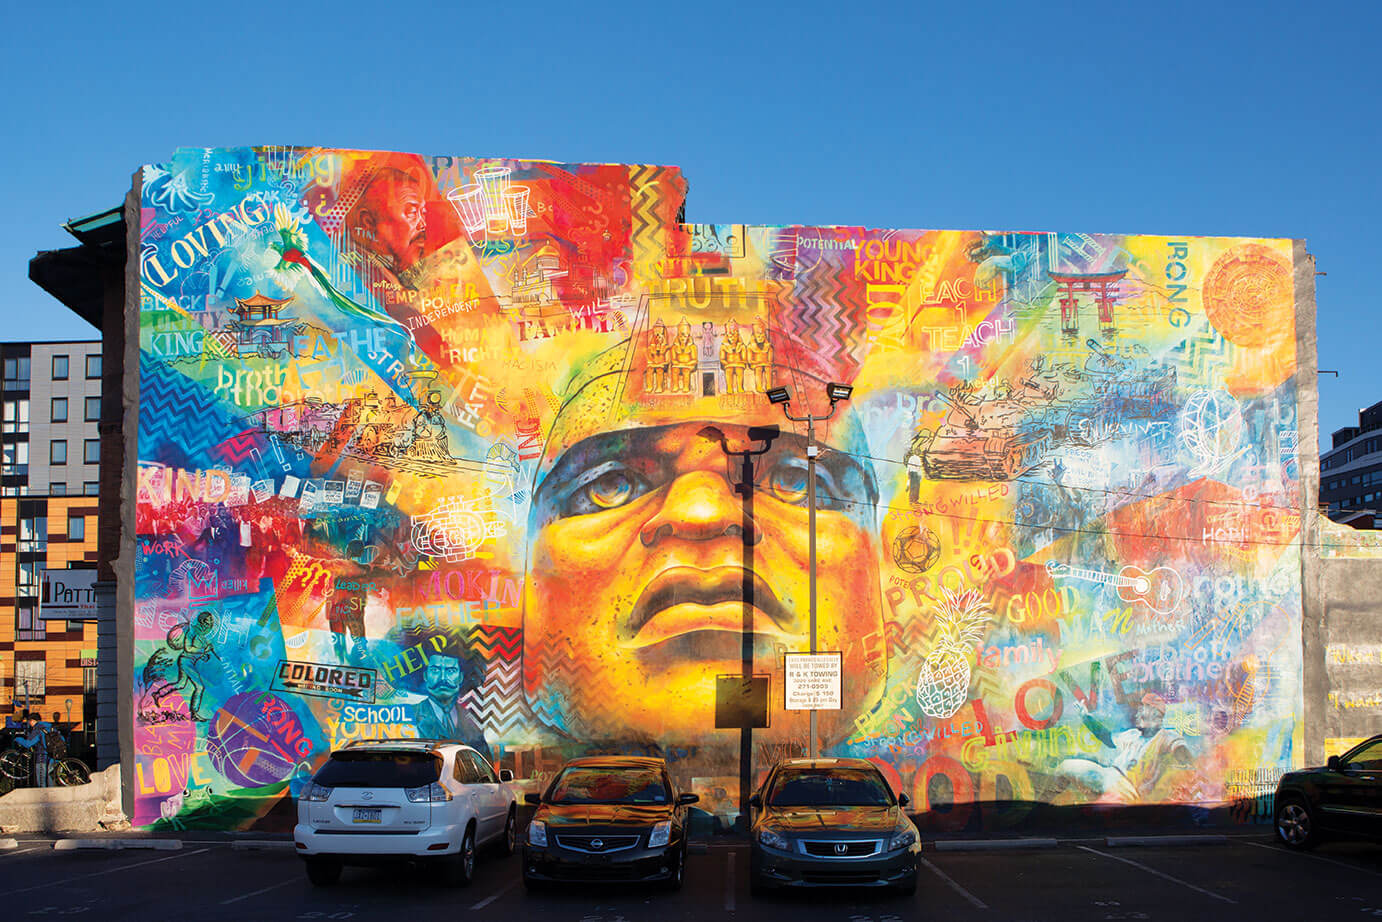 Colorful mural on the side of a building, face is in the middle, with what appear to be rays of light shining from it with other images